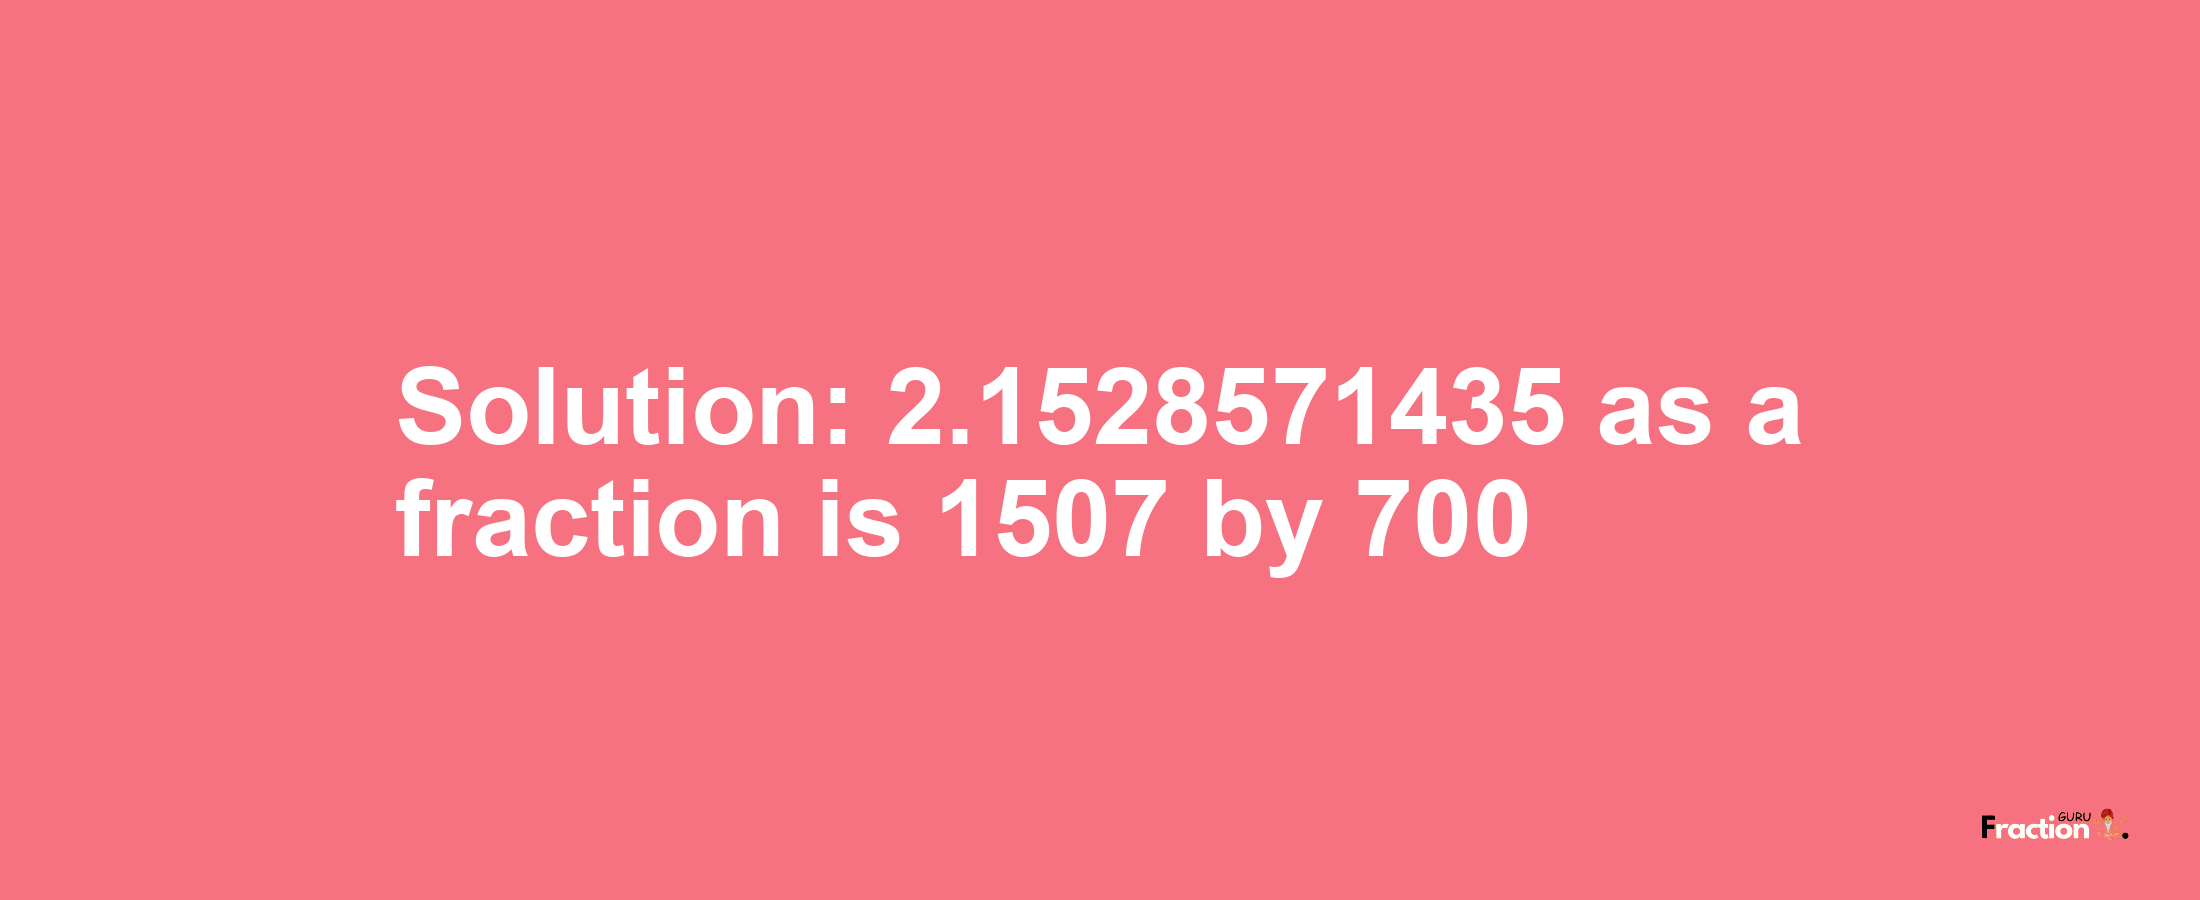 Solution:2.1528571435 as a fraction is 1507/700